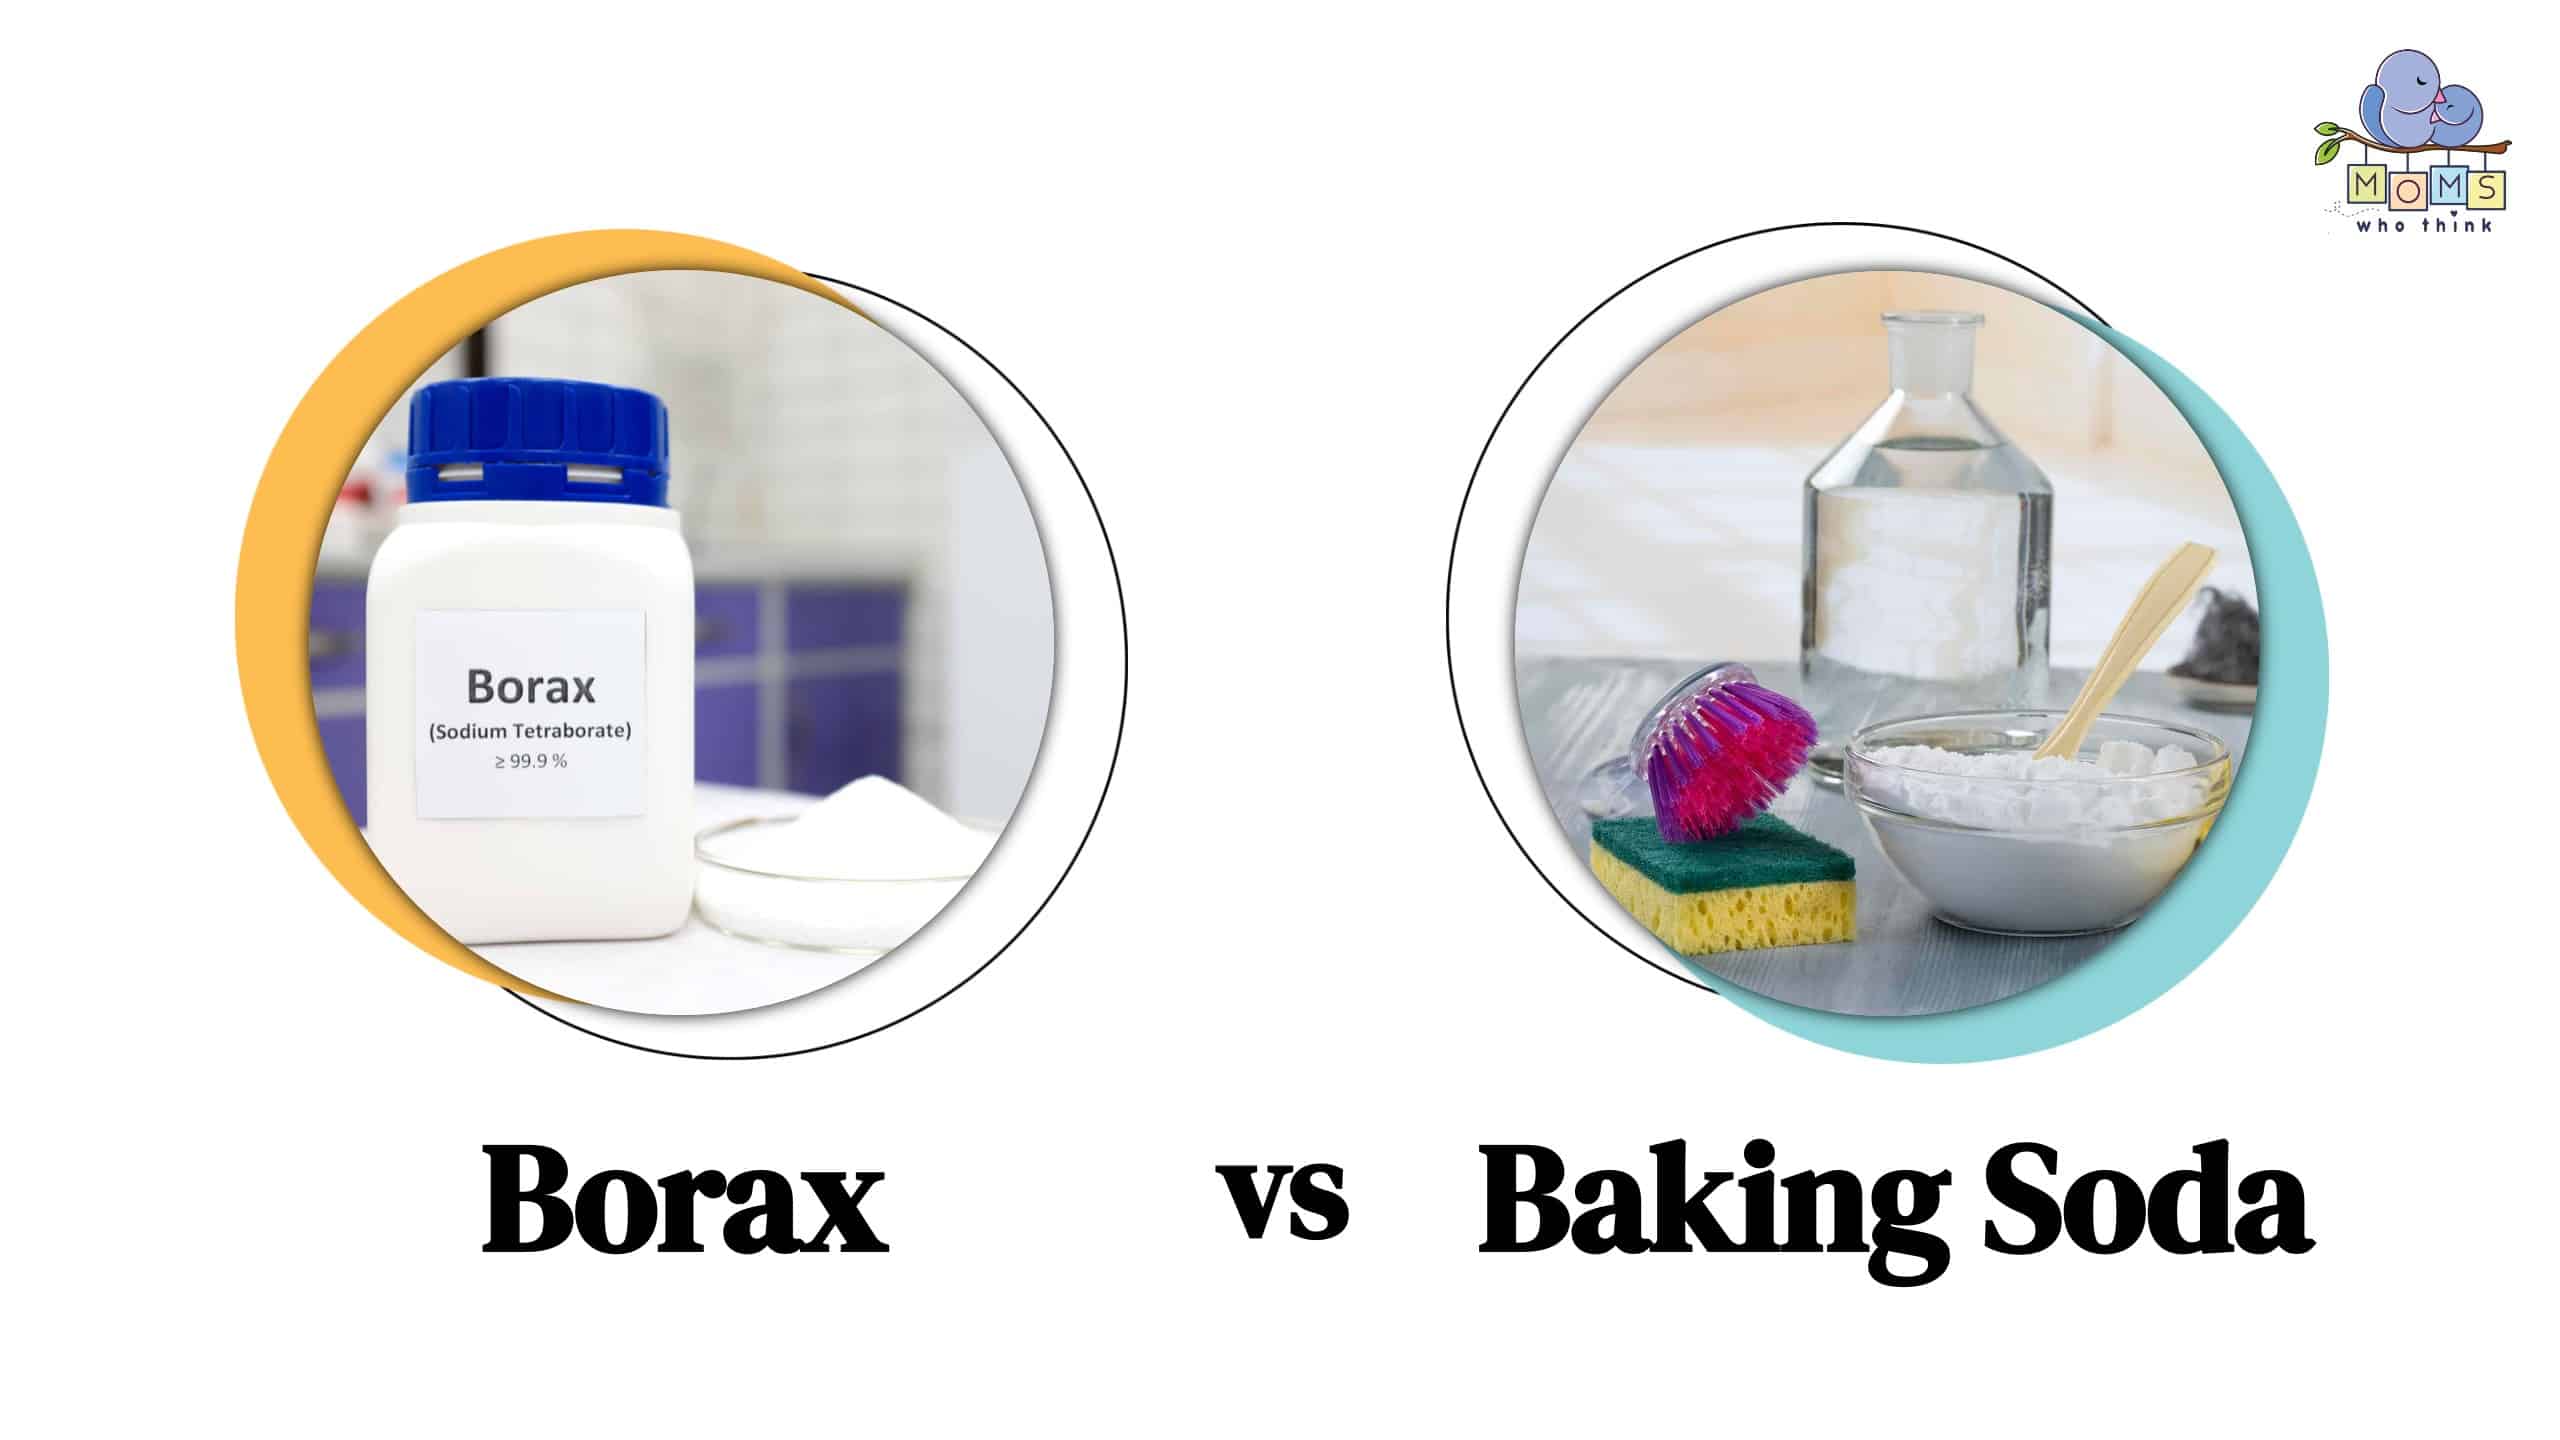 What Is Borax and How Is It Used?